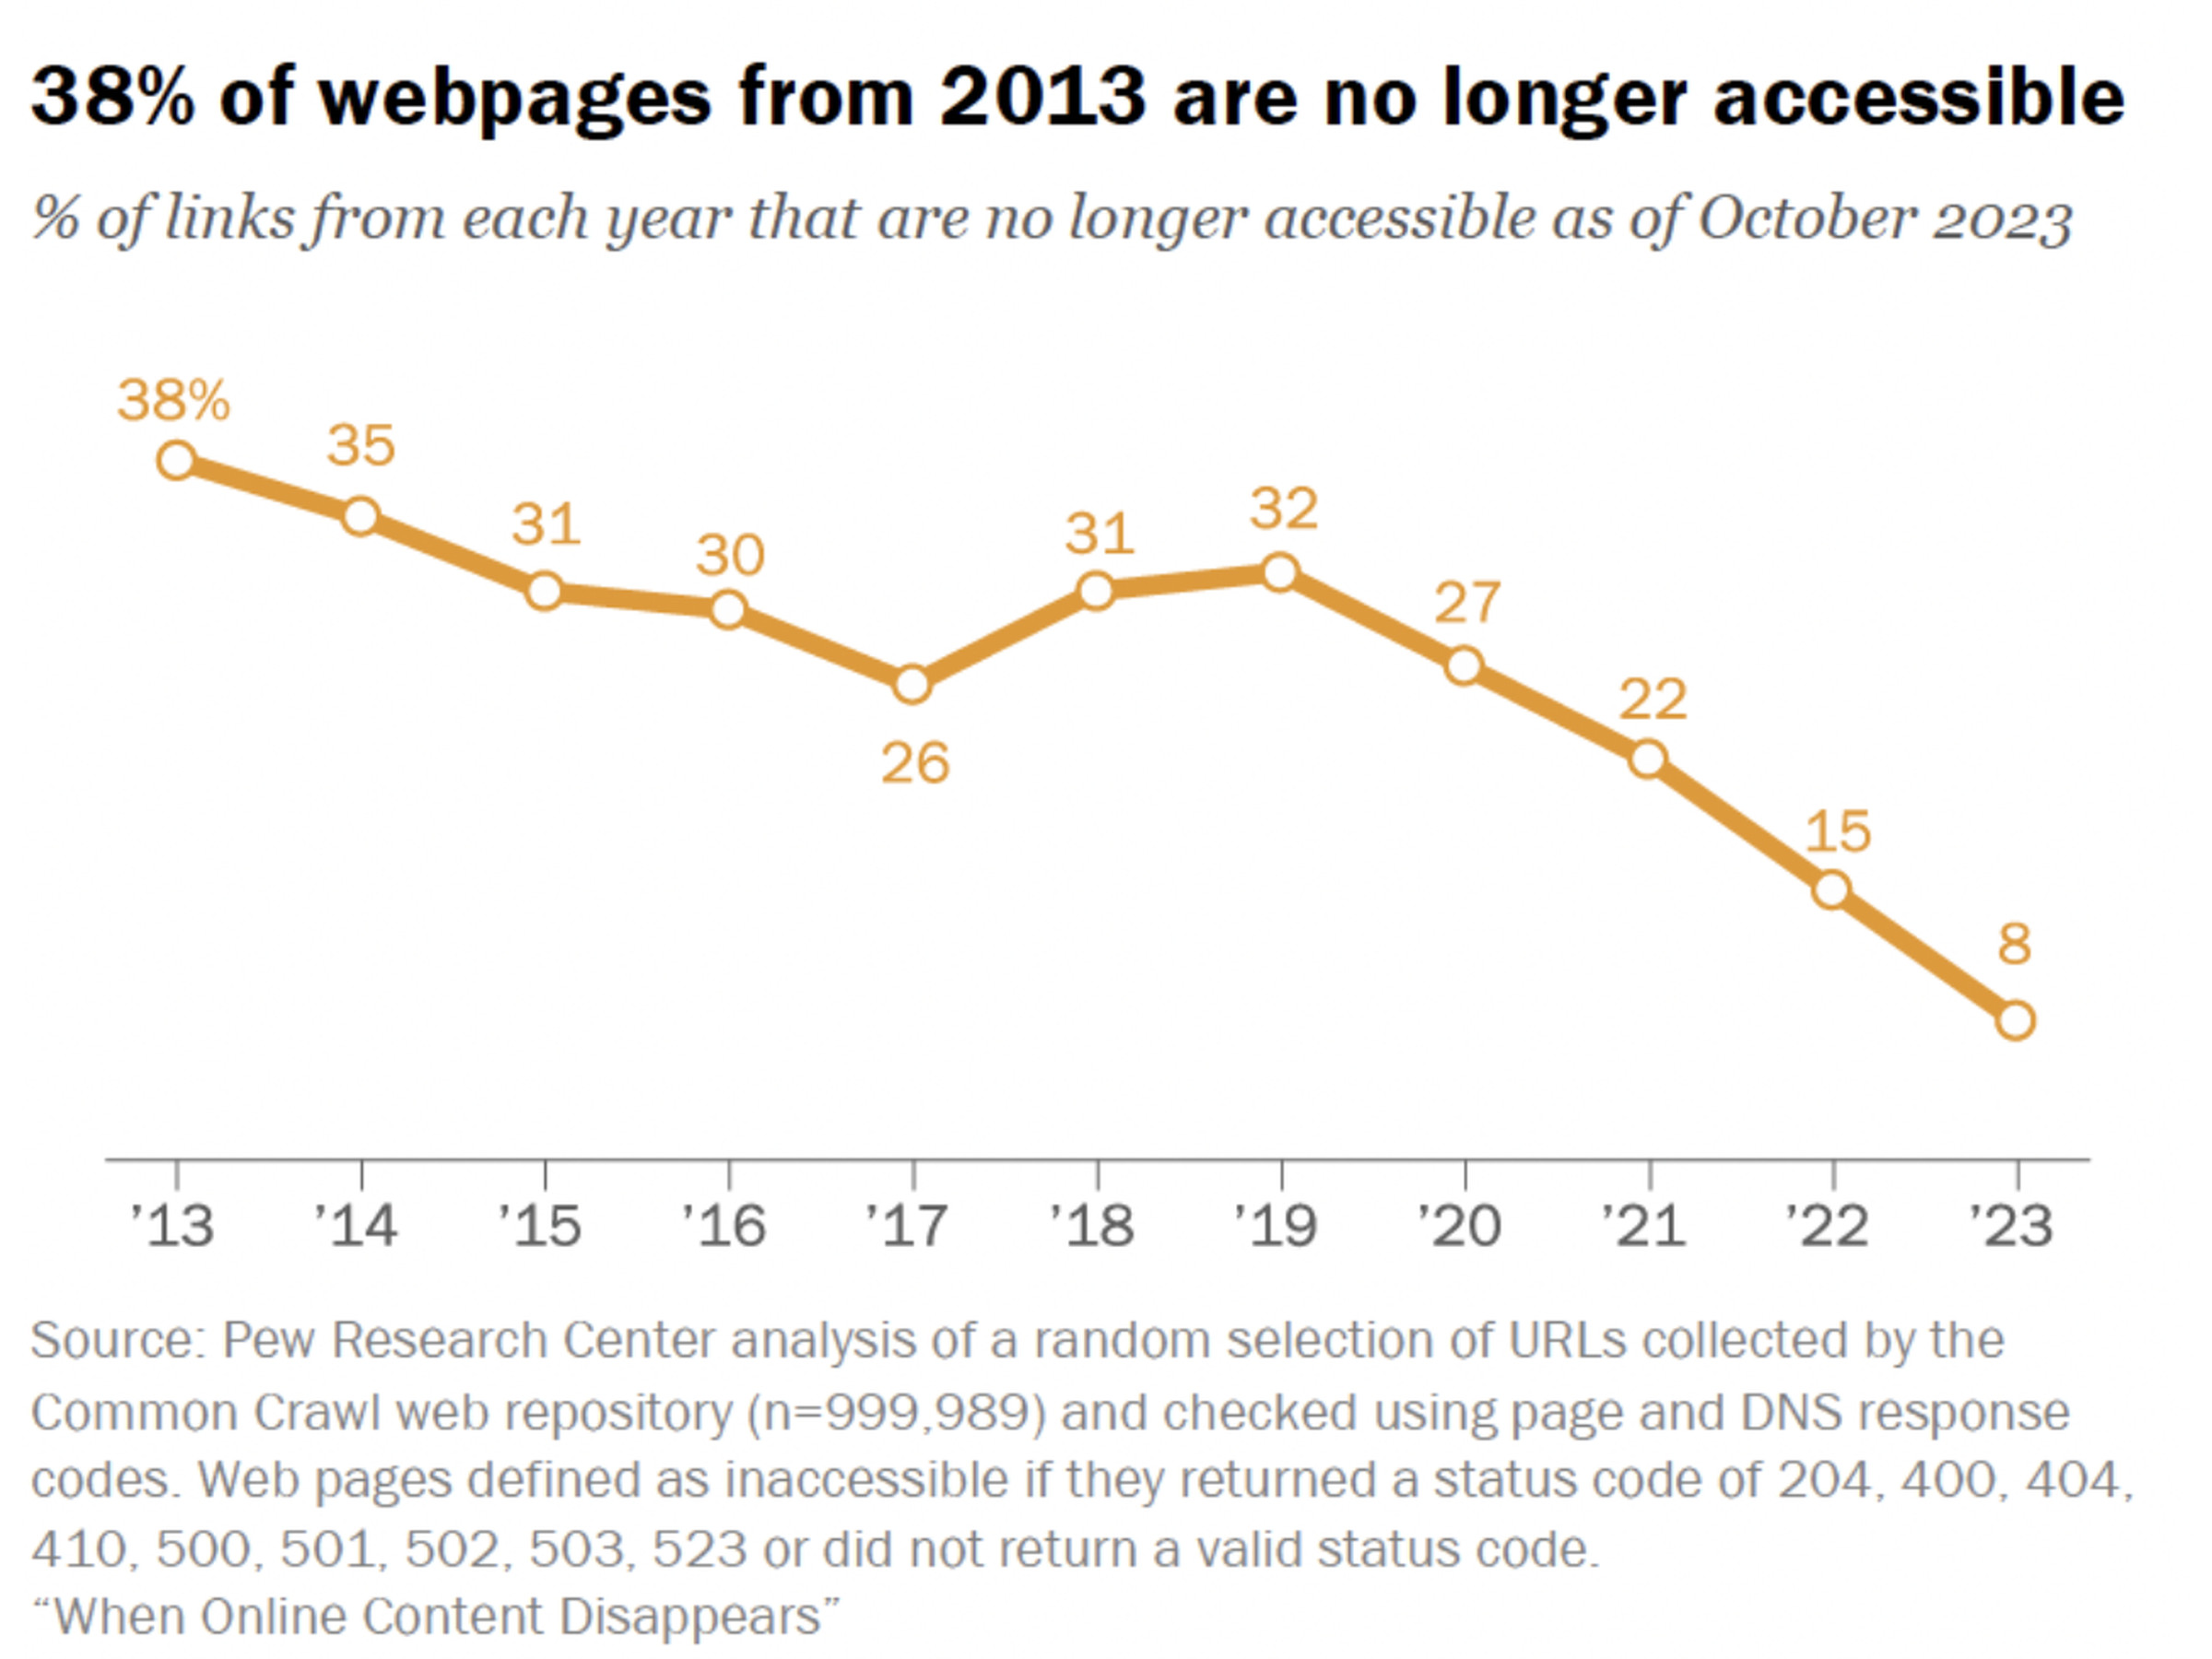 Pew data showing that 38 percent of webpages from 2013 are no long accessible as of October 2023.